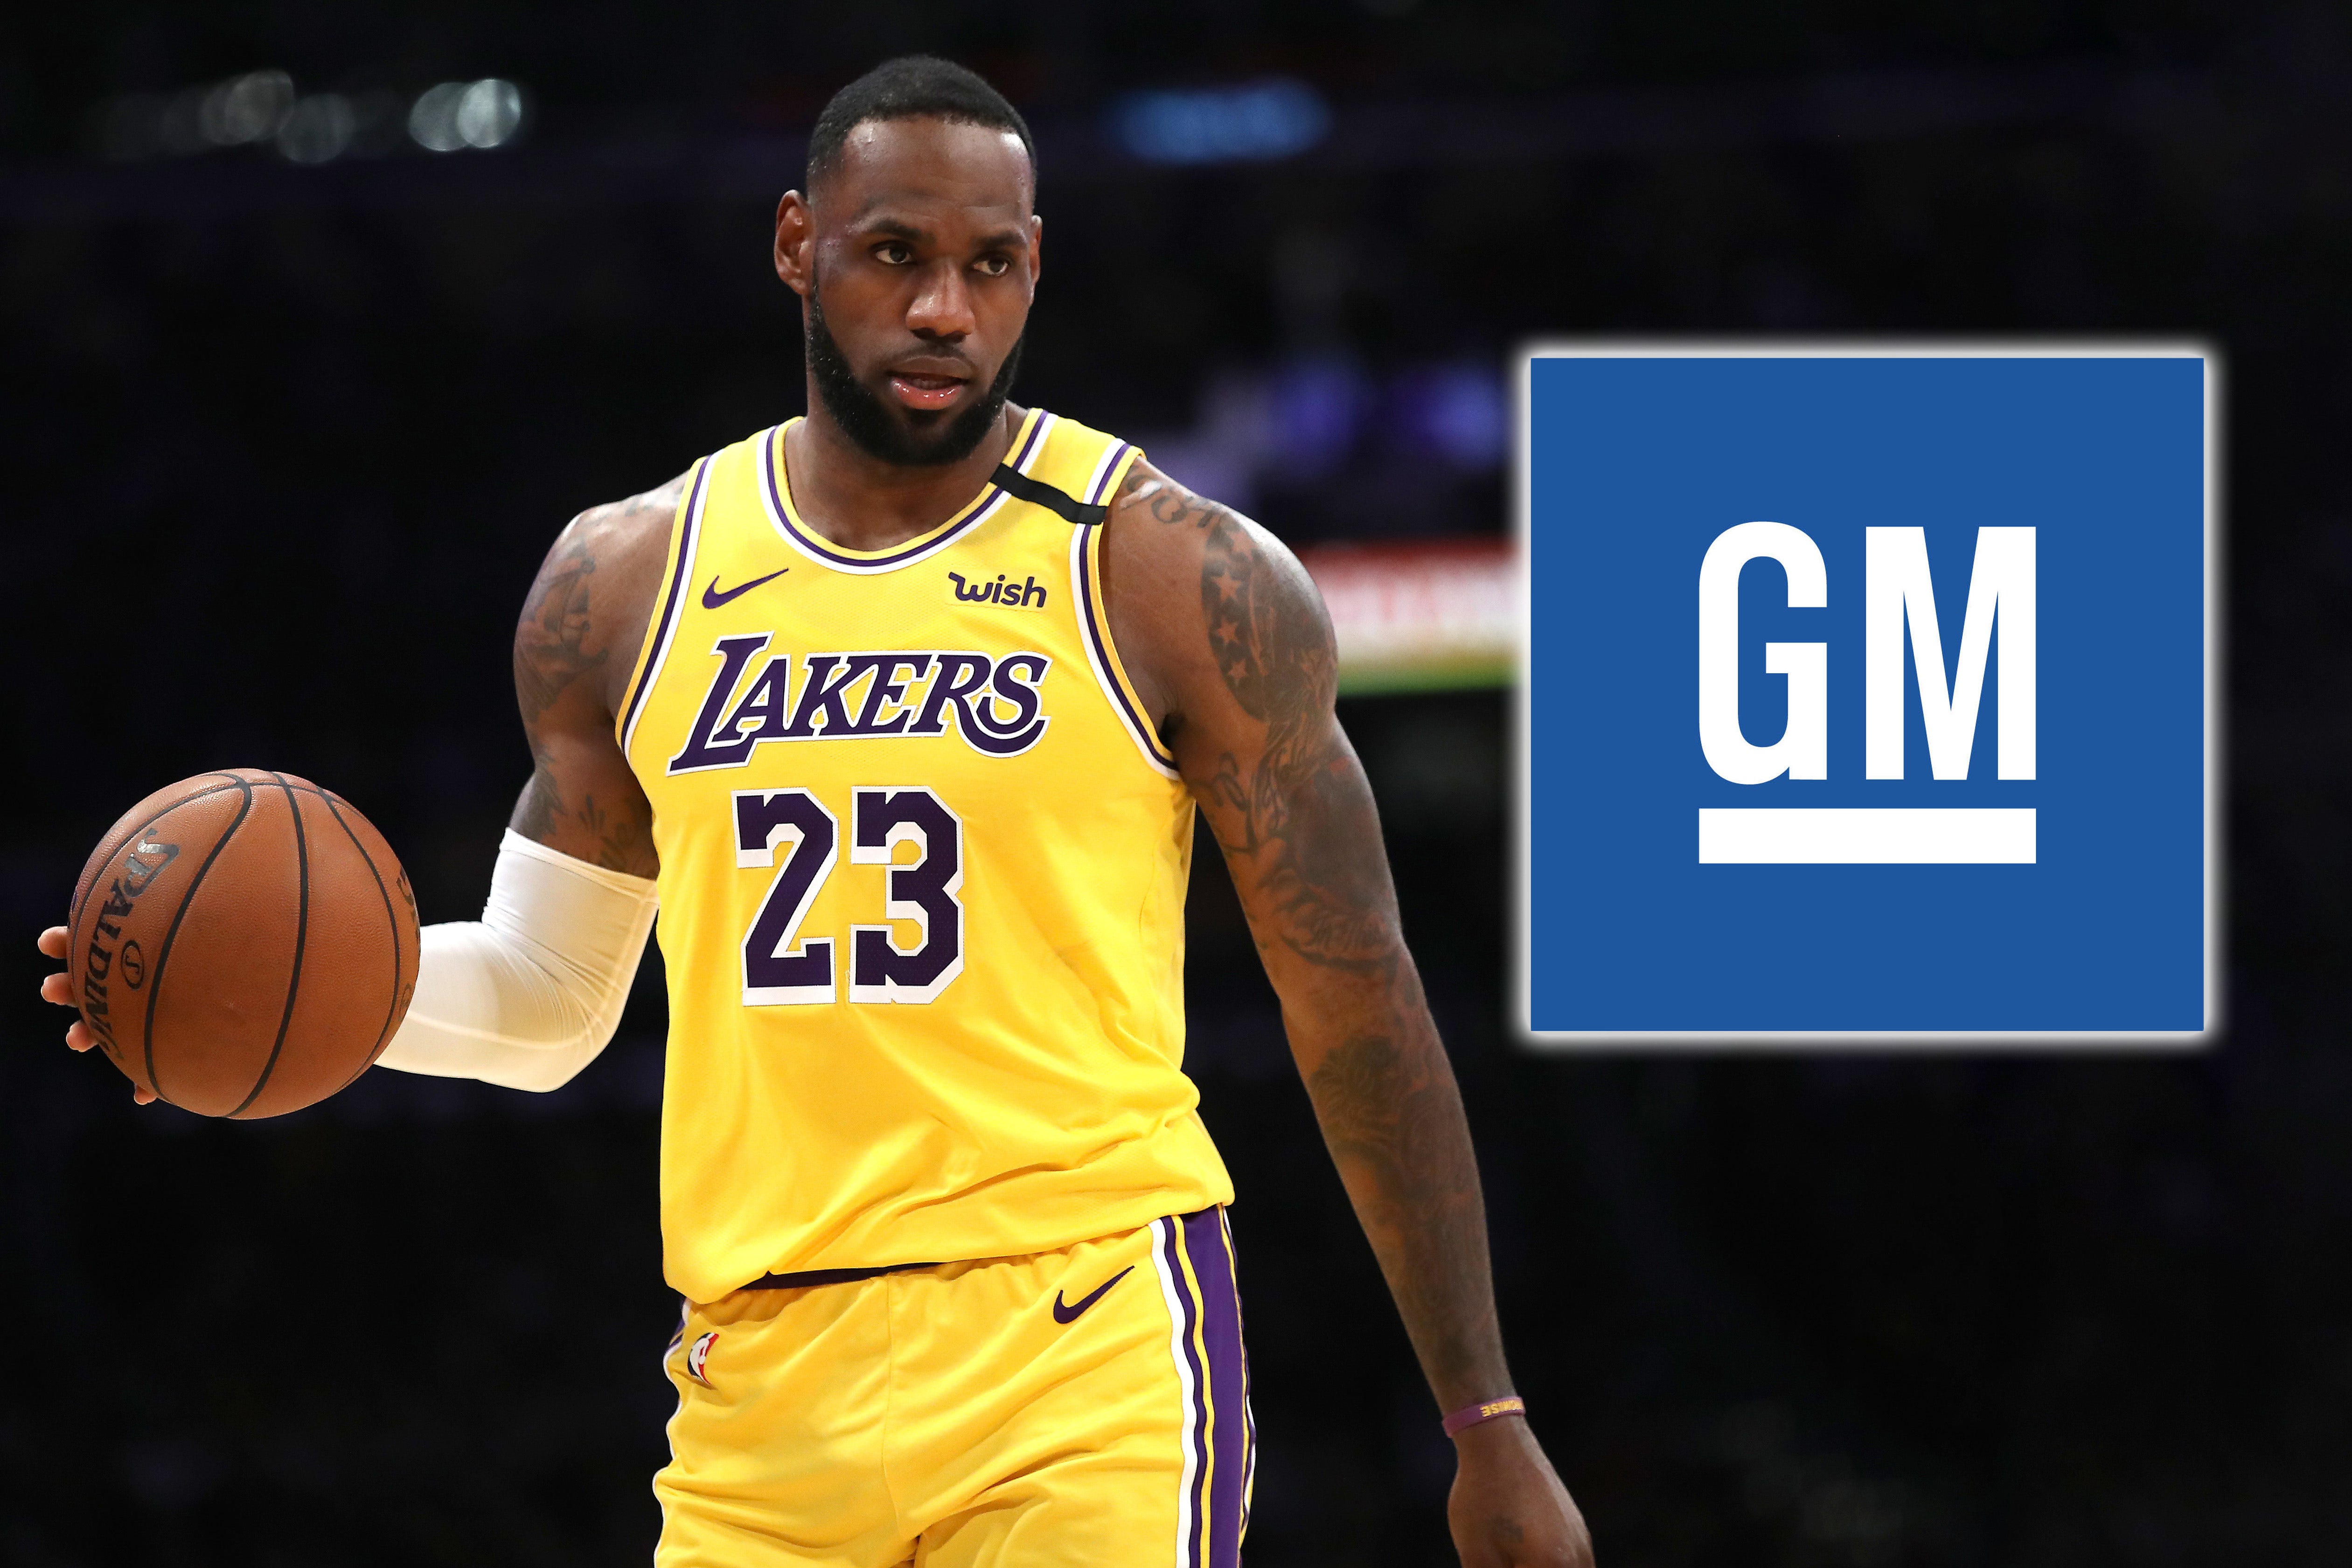 LeBron James' deal with the Lakers is a gift for e-commerce app Wish - Vox